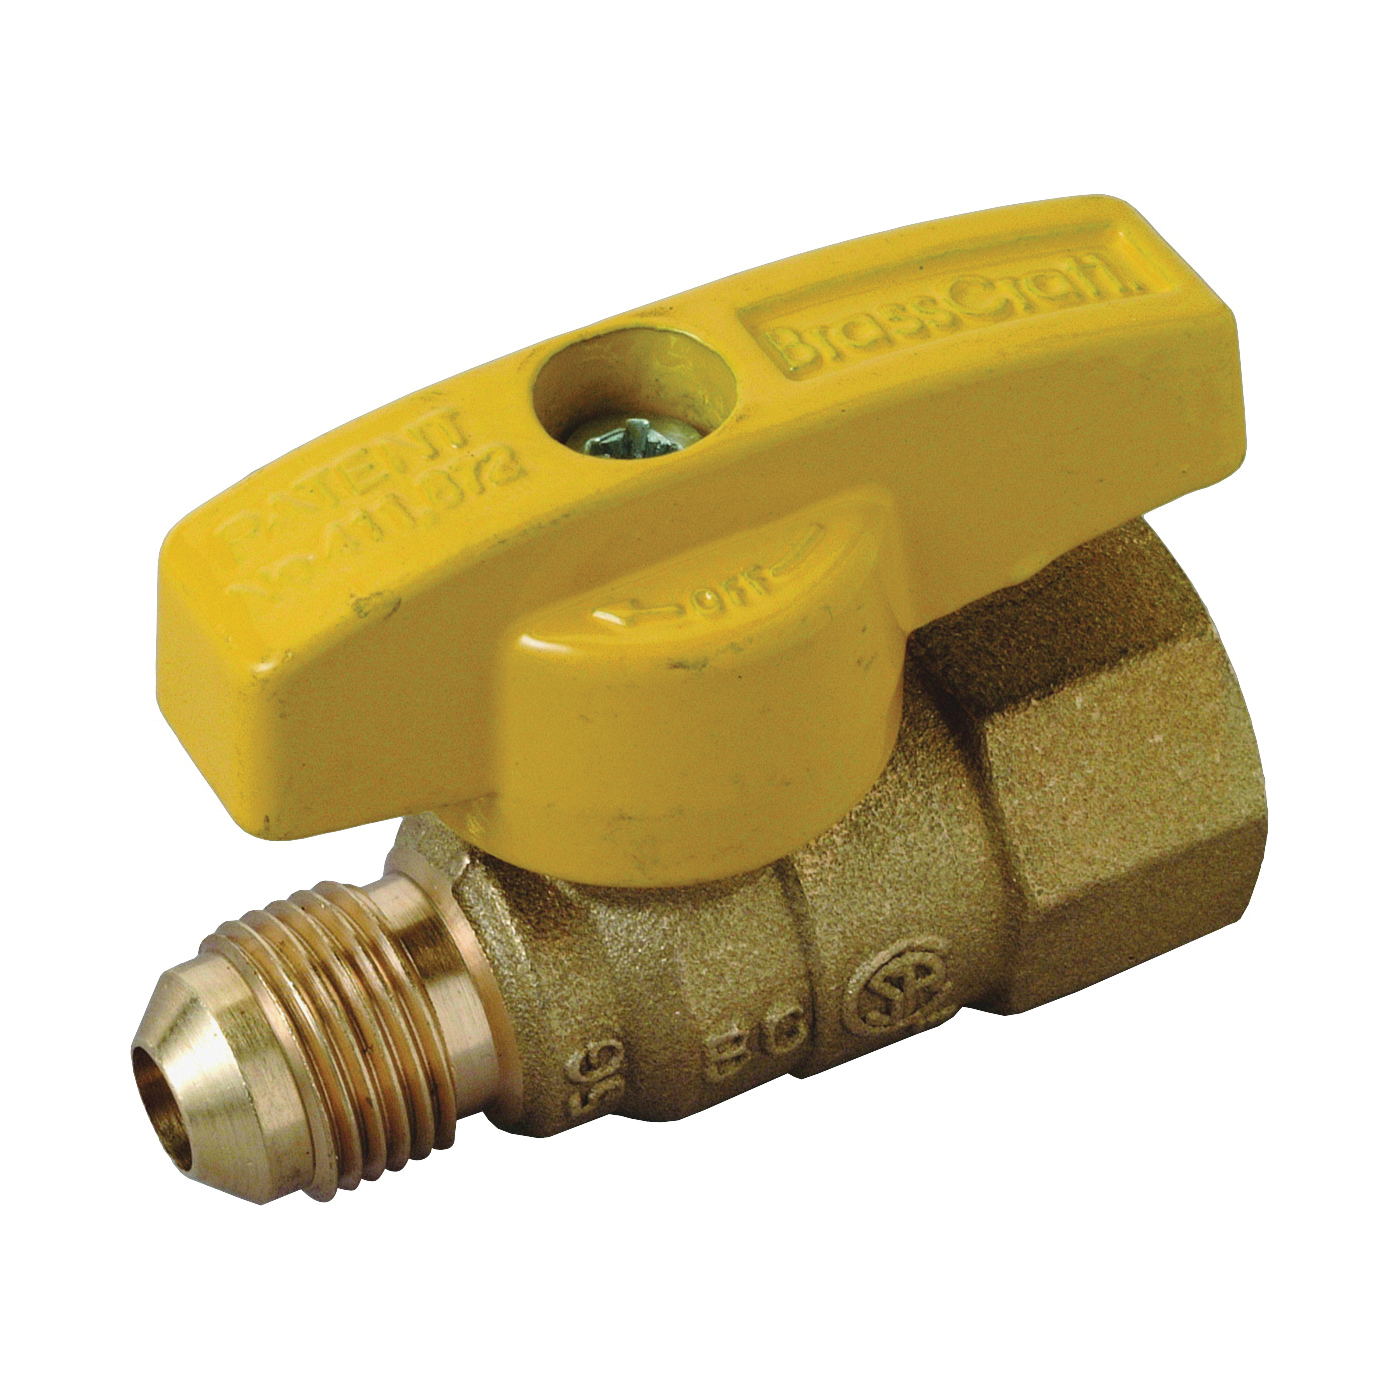 PSSL-12 Gas Ball Valve, 3/8 x 1/2 in Connection, Flared x FIP, 5 psi Pressure, Brass Body